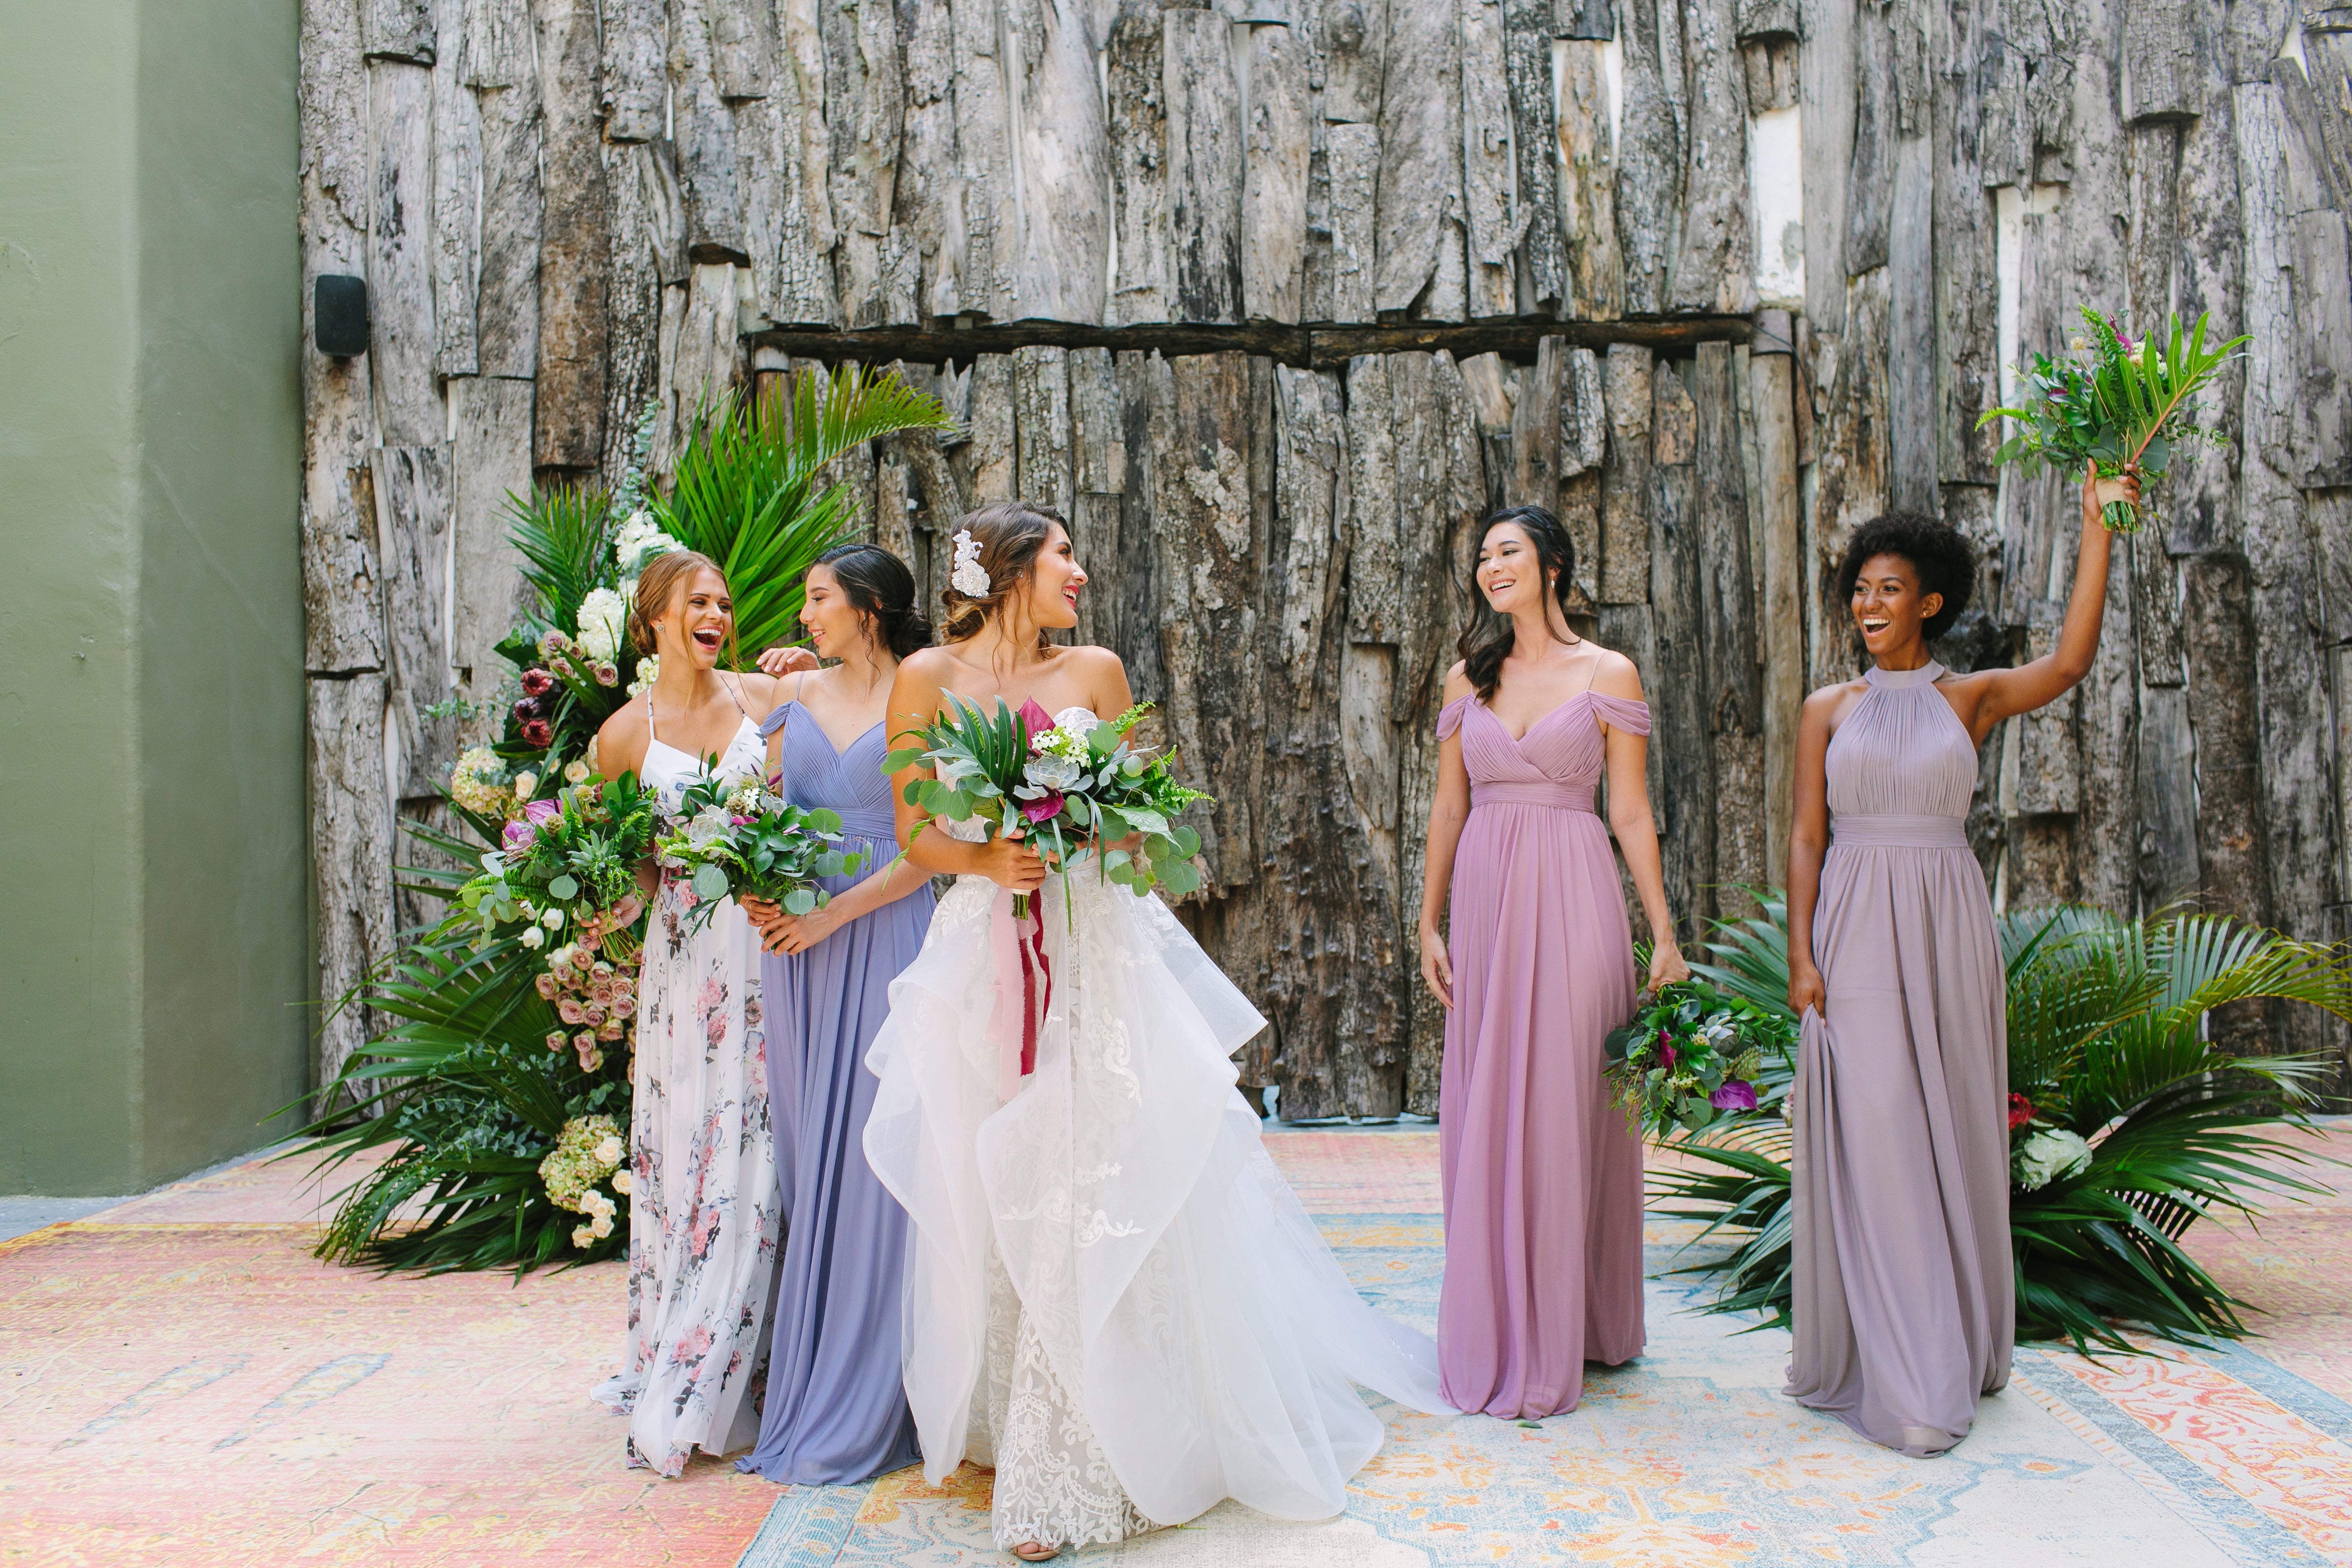 7 tips for wedding photos you'll love: We took Kleinfeld Bridal wedding dresses and Kleinfeld Bridal Party bridesmaids dresses to Tulum, Mexico for a fun photoshoot on the beach full of flowers, sun, sand and fun!